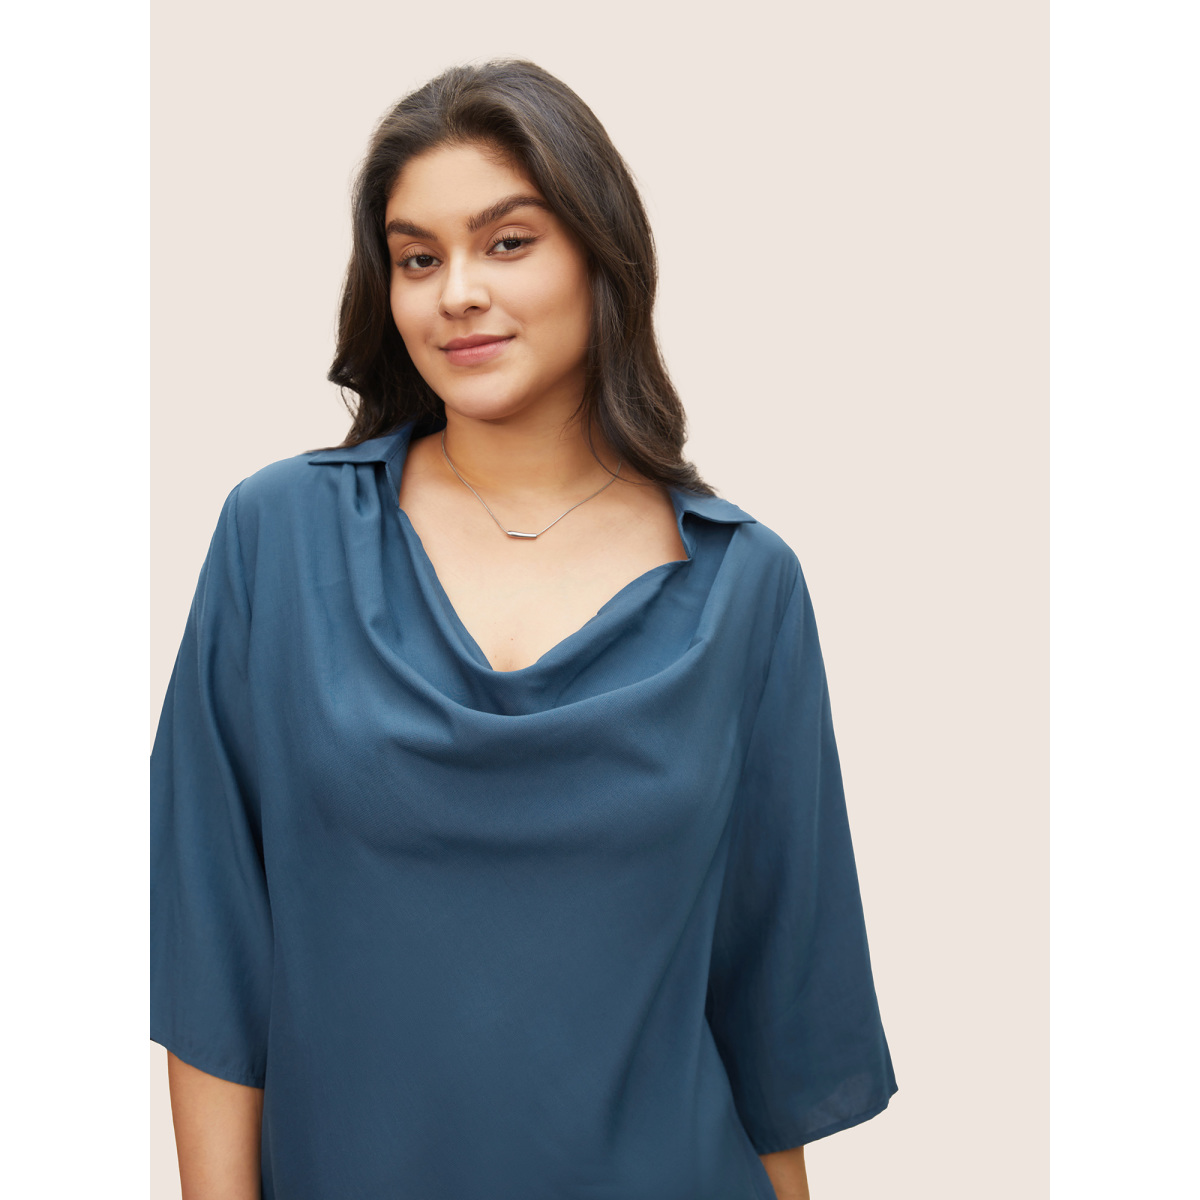 

Plus Size Aegean Cowl Neck Plain Bell Sleeve Blouse Women Work From Home Elbow-length sleeve Cowl Neck Work Blouses BloomChic